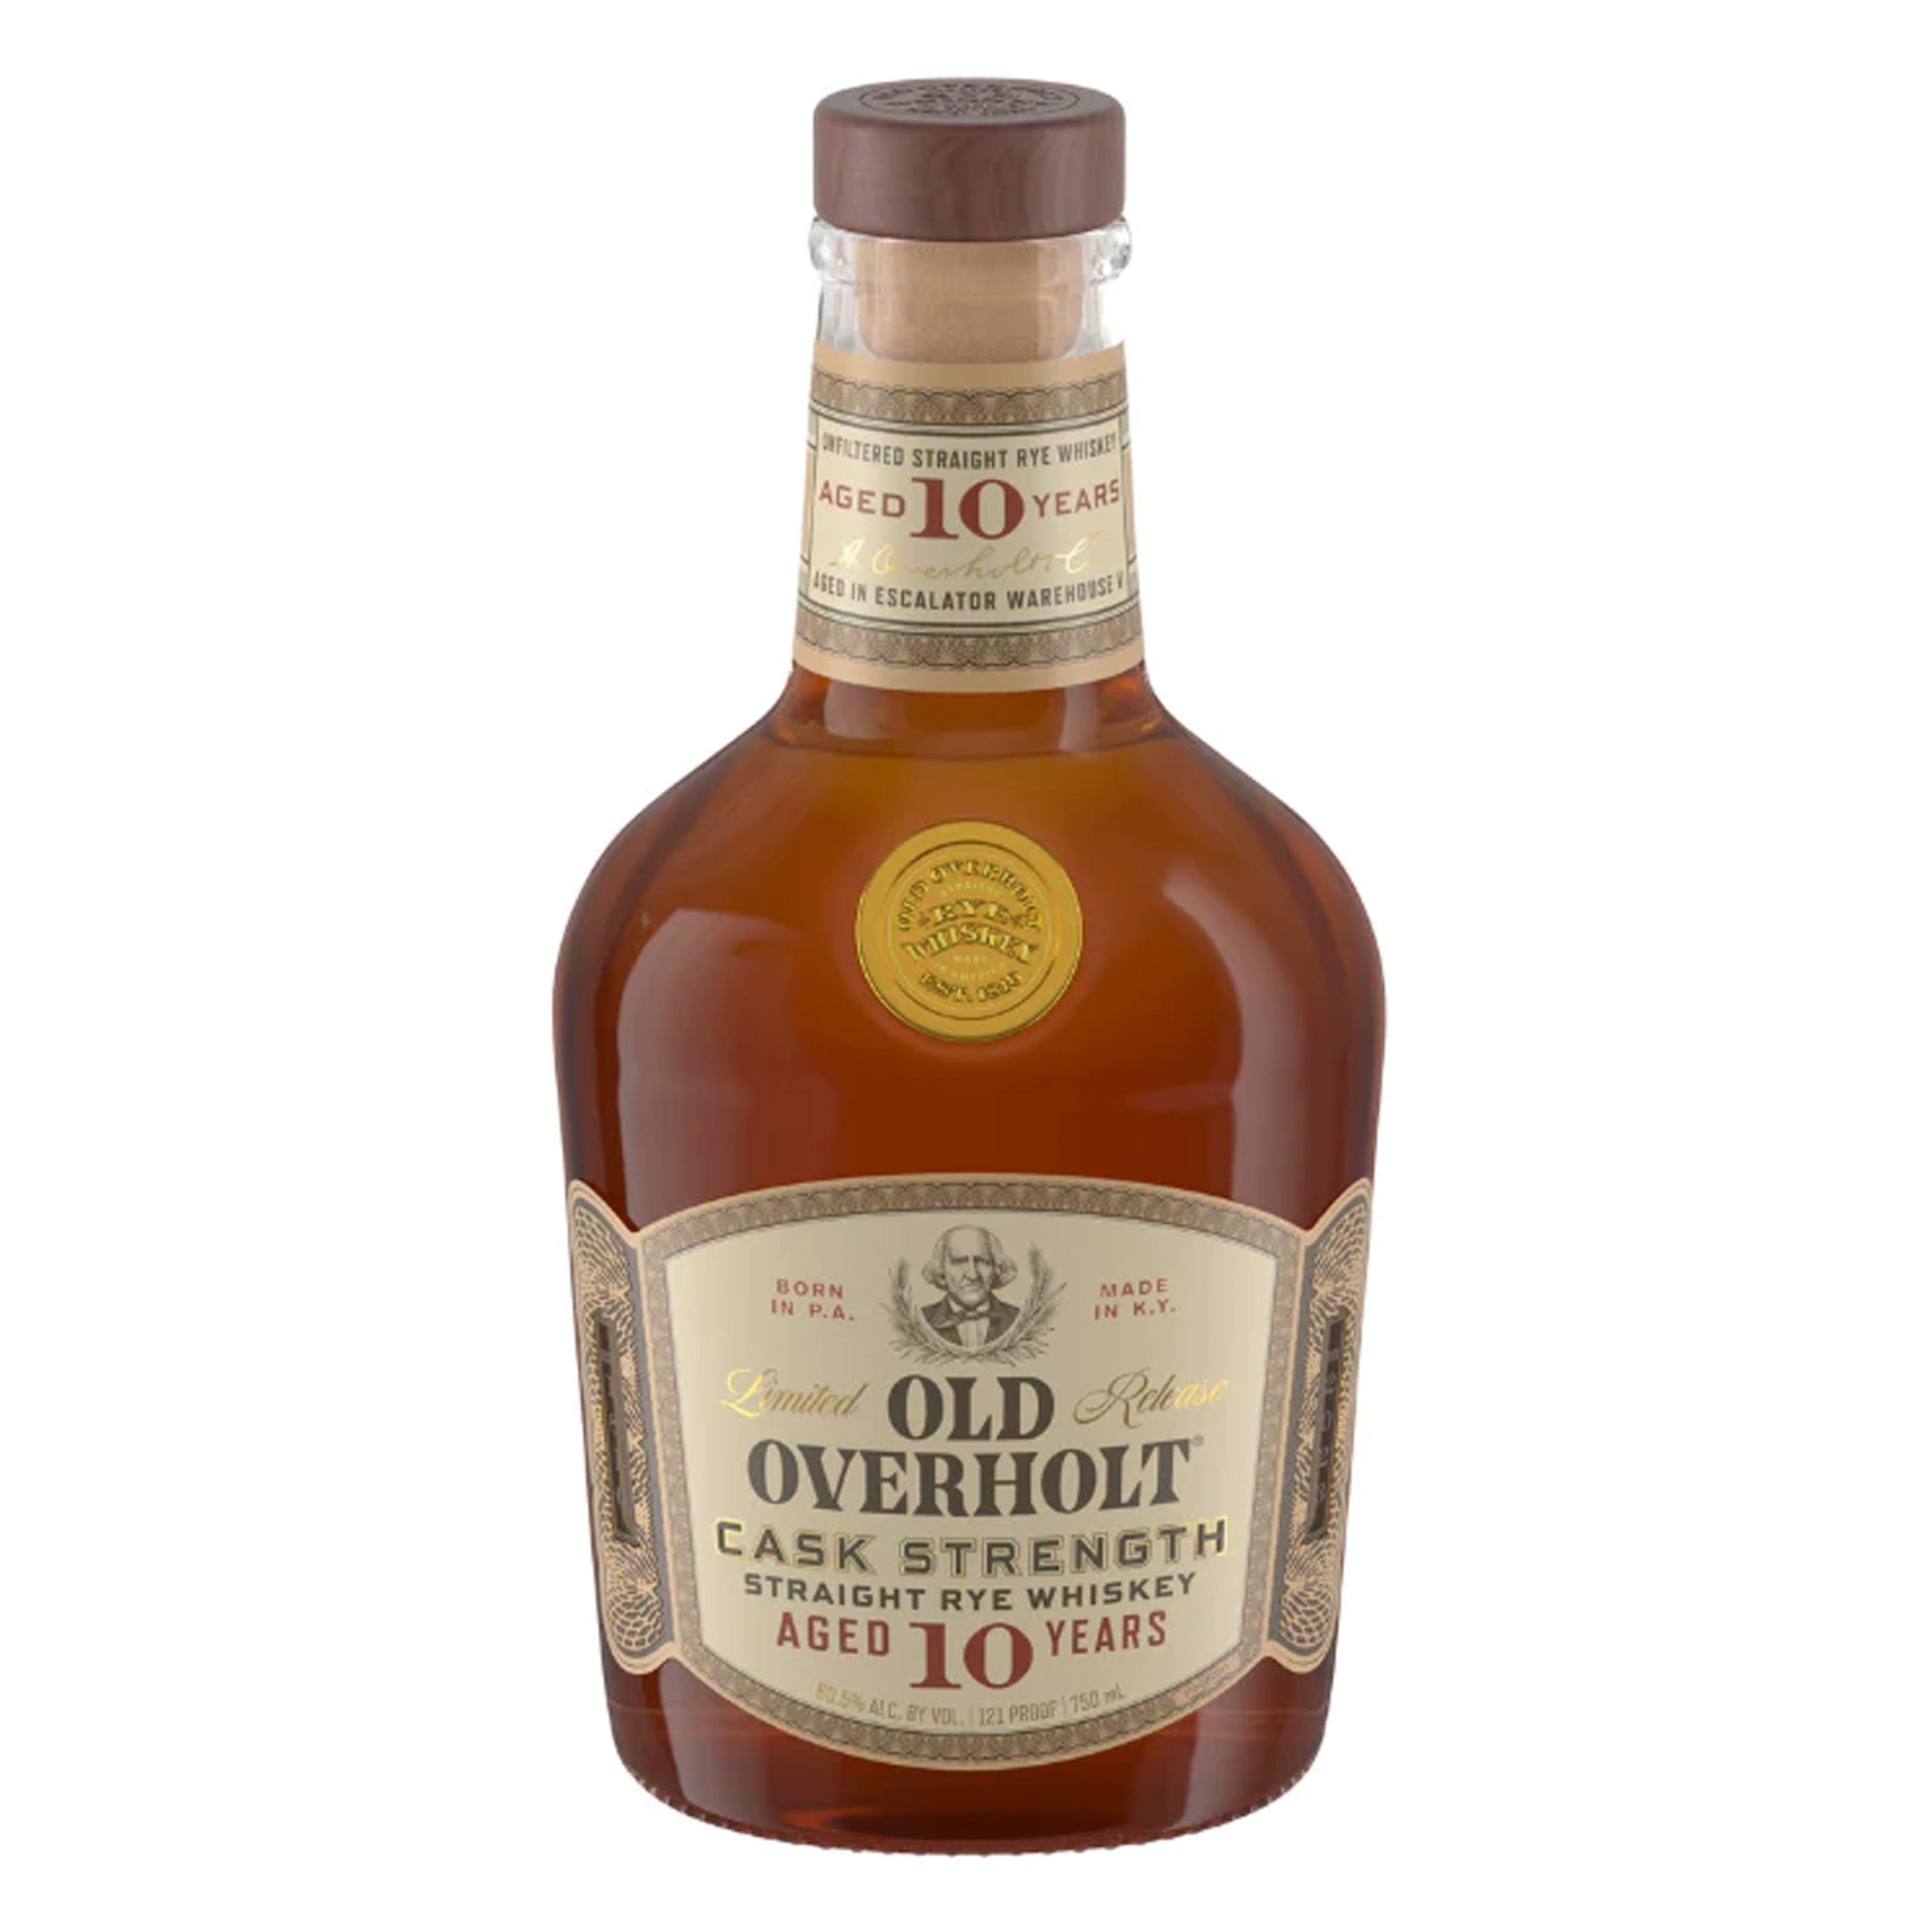 Old Overholt 10 Year Old Cask Strength Rye Whiskey